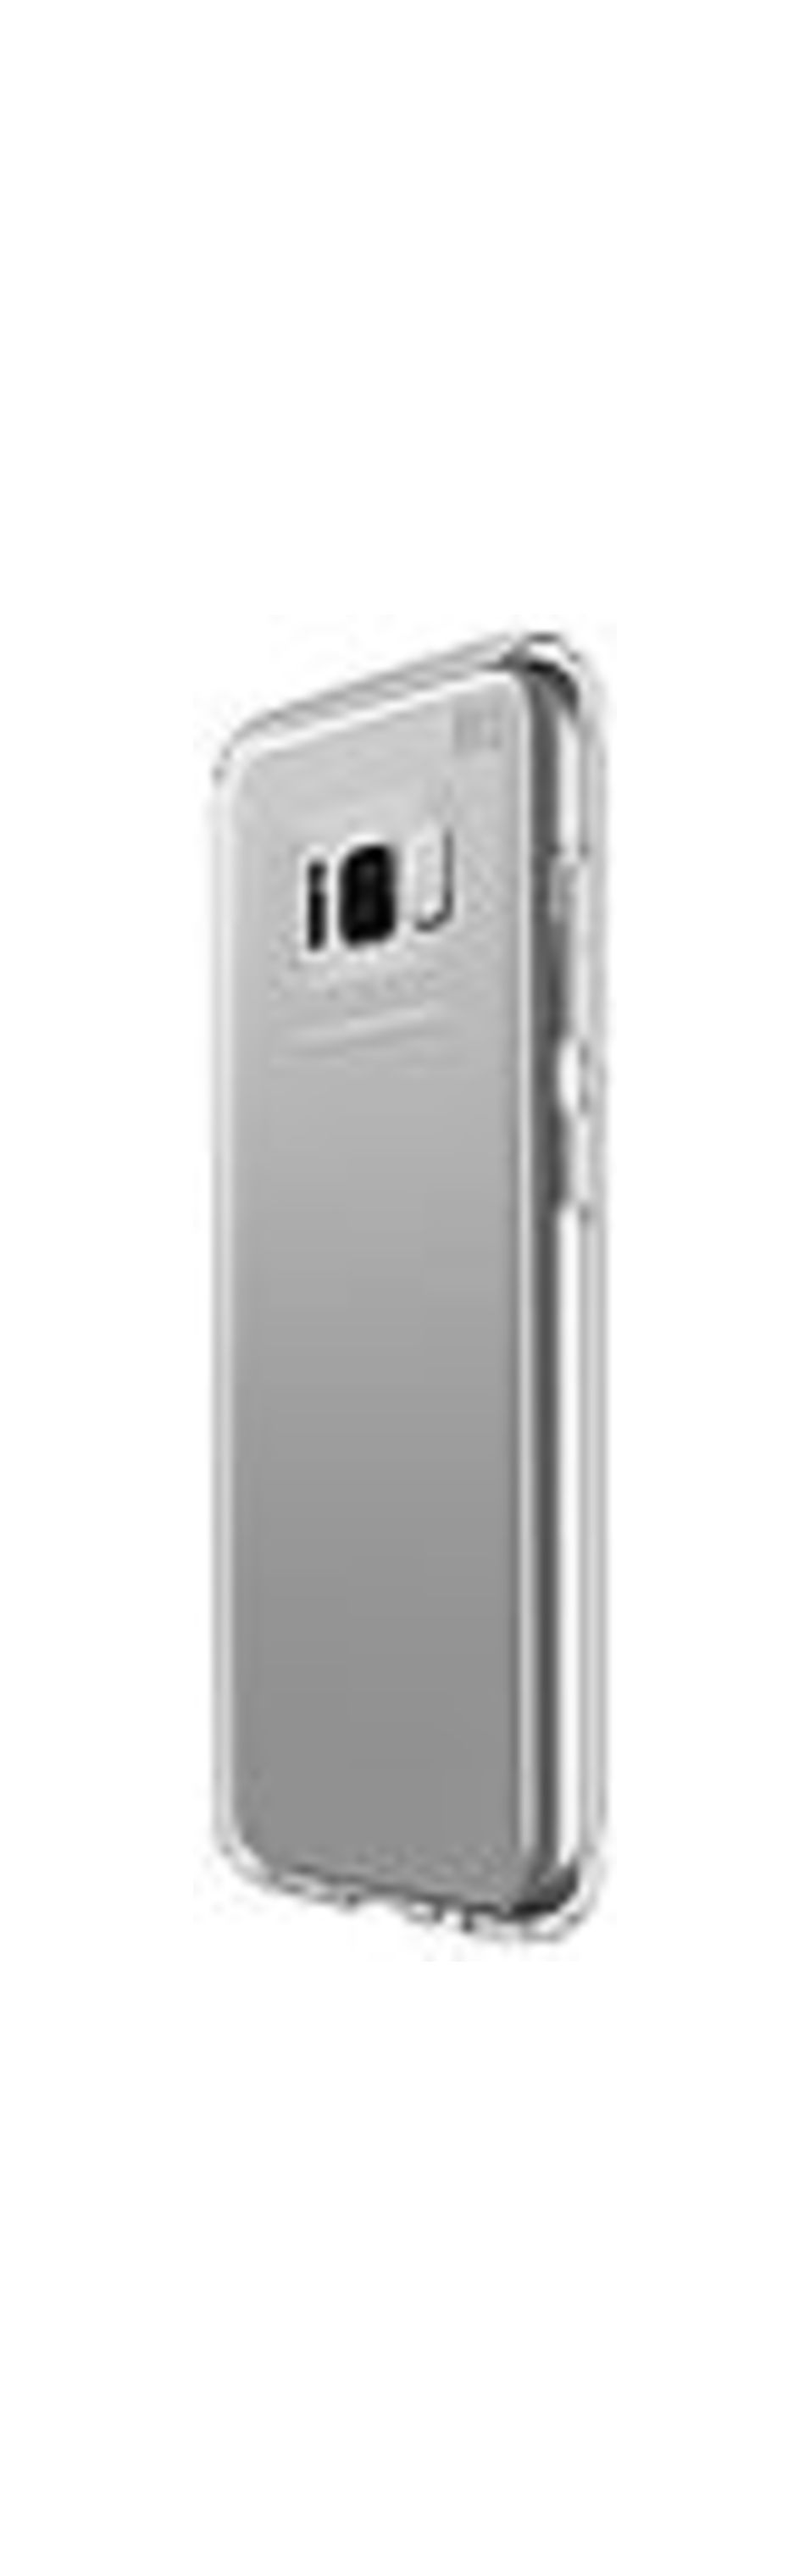 Speck Presidio CLEAR Smartphone Case - Smartphone - Clear - Glossy - Drop Resistant, Shock Absorbing, Damage Resistant, Scratch Resistant, UV Resistan